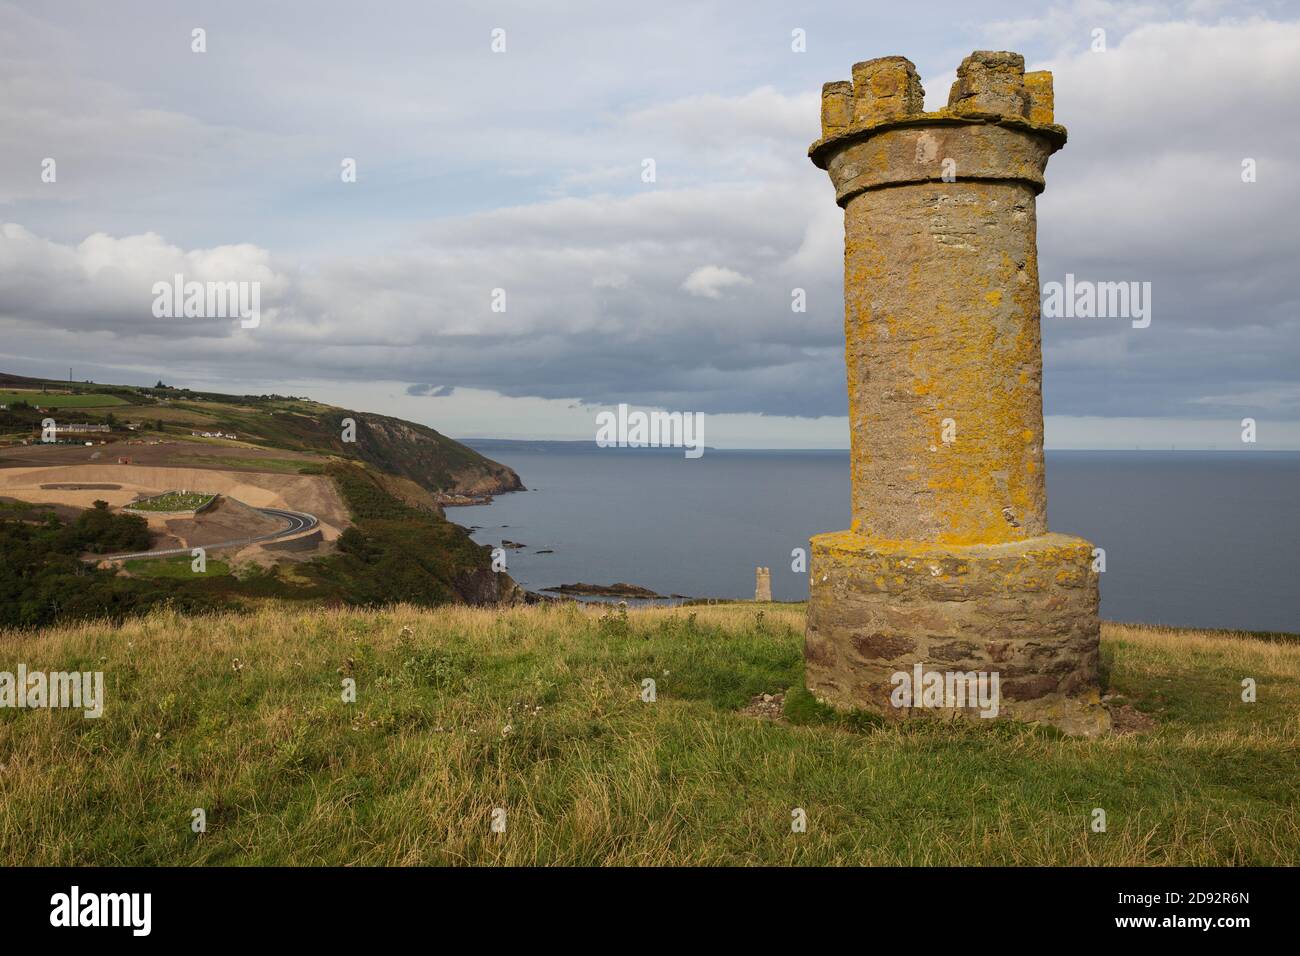 The Duke's Candlesticks at Berriedale in Caithness, Scotland. Work for realignment of the A9 at the hairpin on the Berriedale Braes beyond. Stock Photo